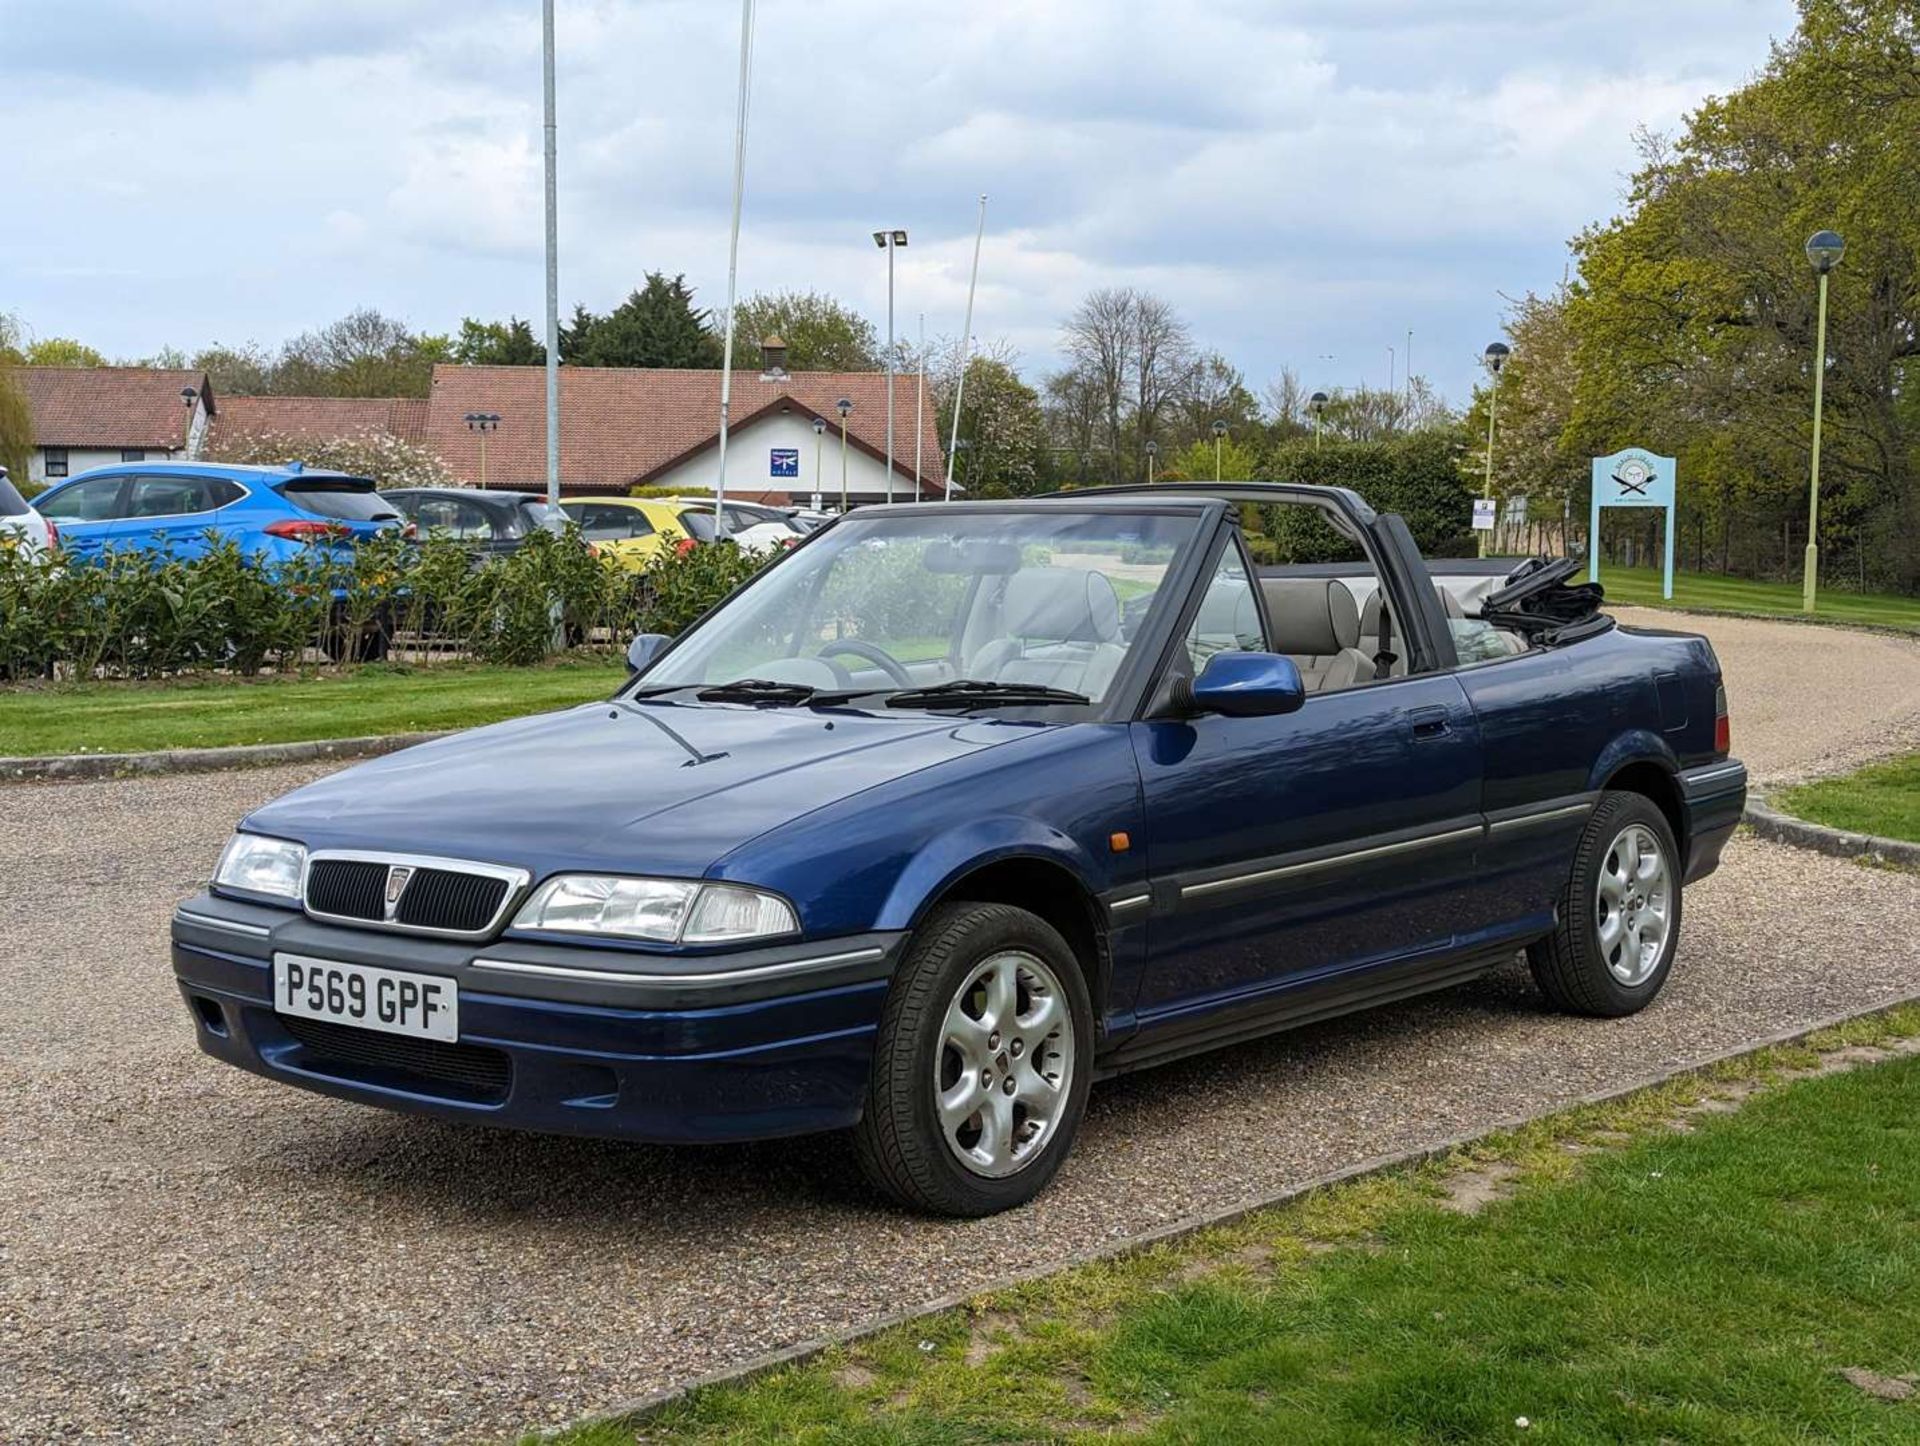 1997 ROVER 216 CABRIOLET - Image 3 of 28